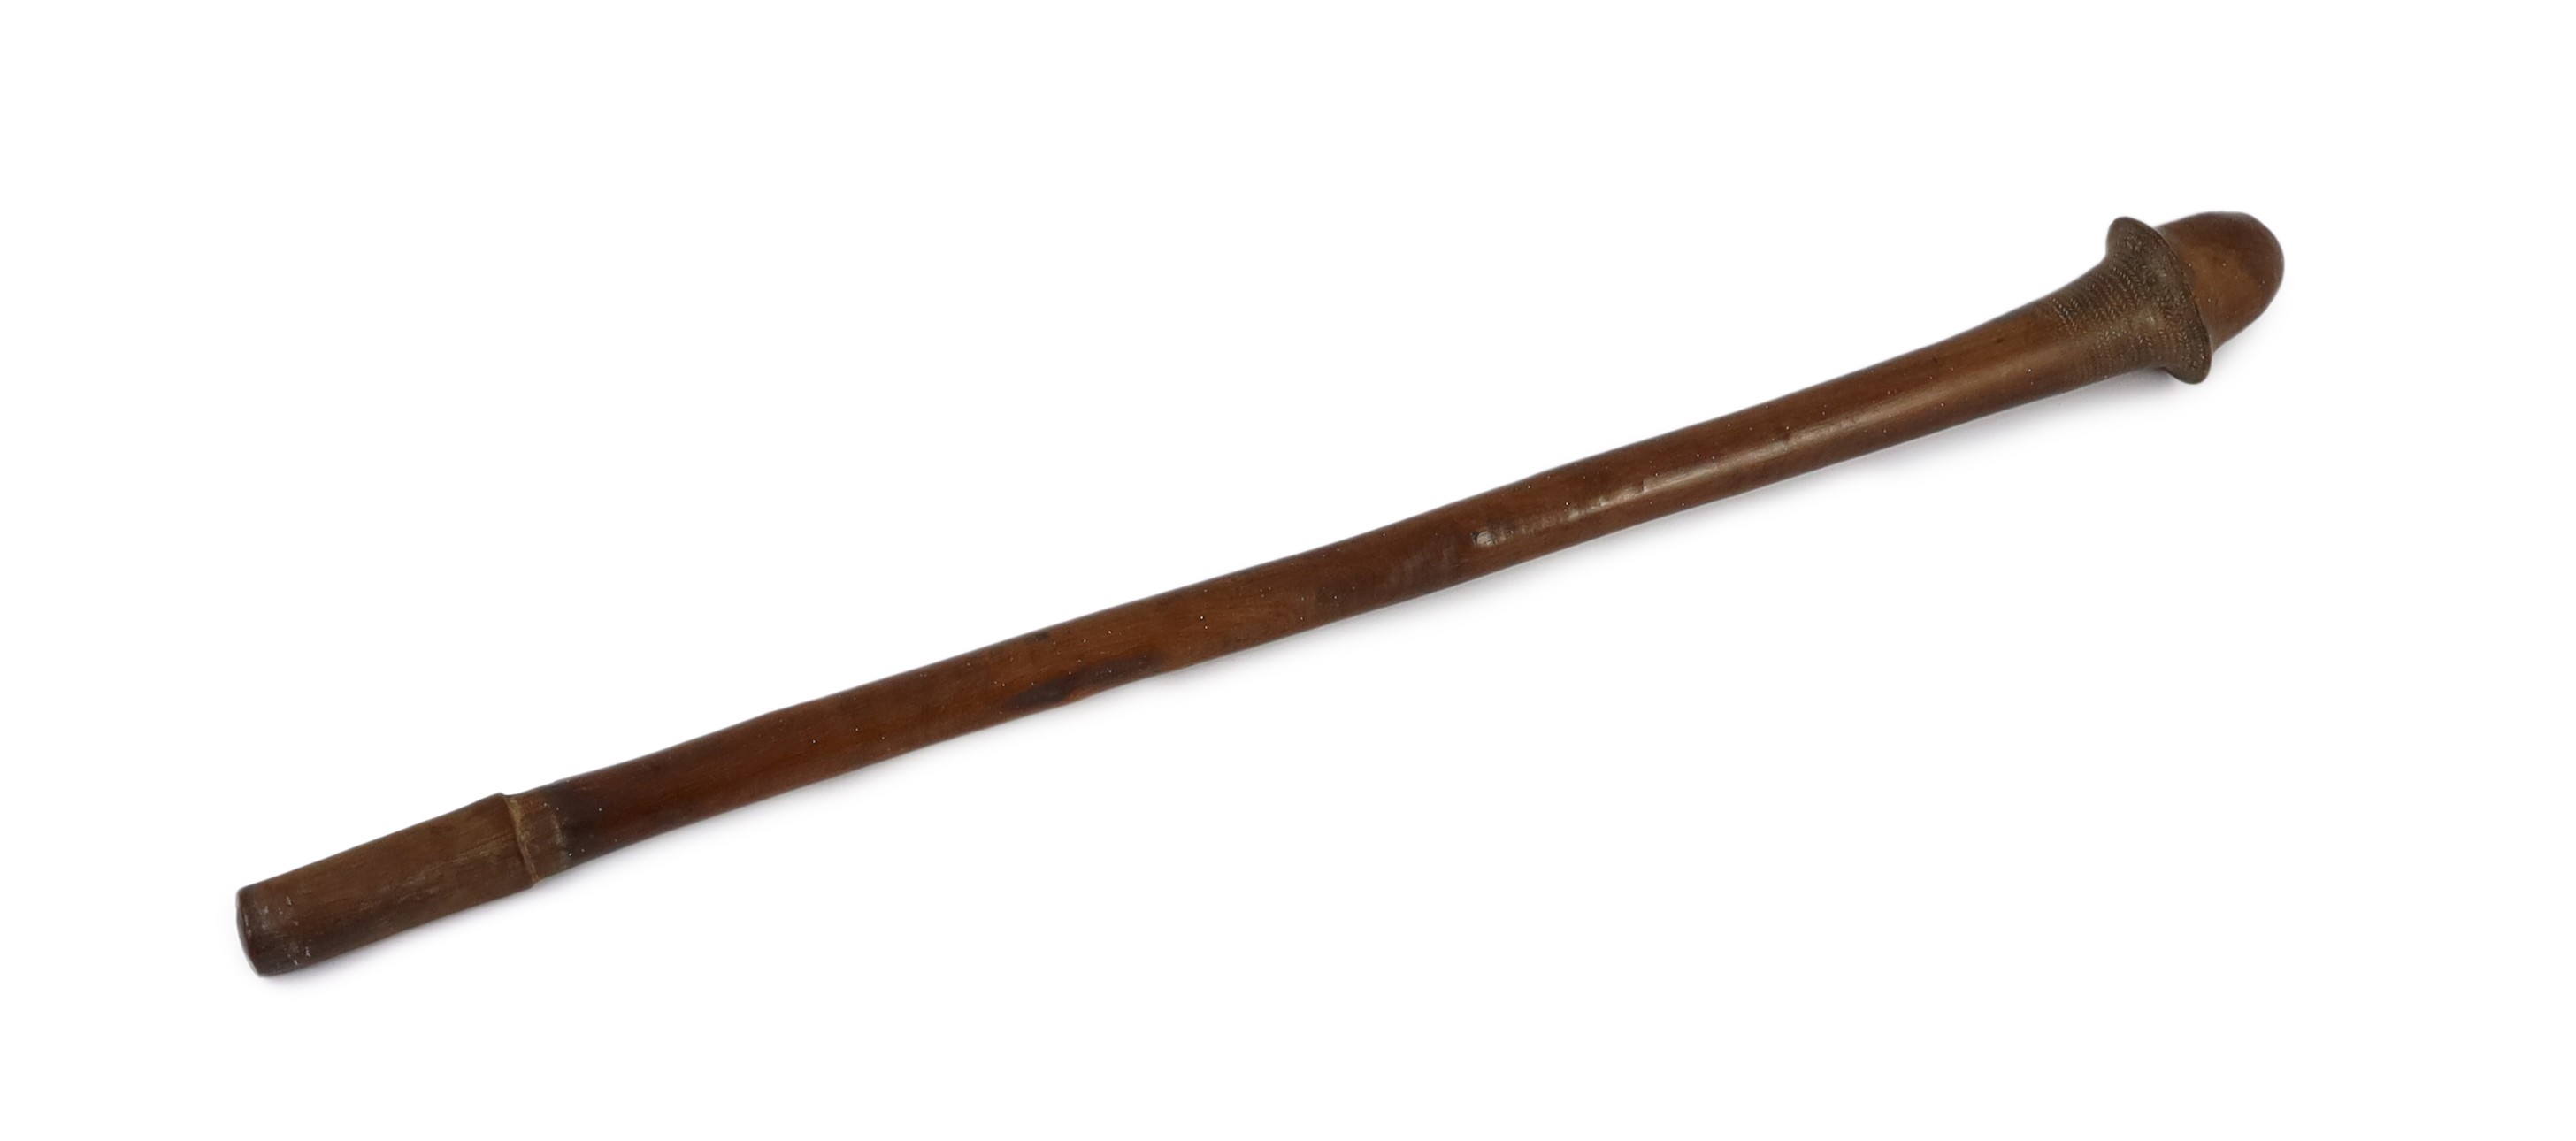 A South Sea Island hardwood war club, with chevron banded engraving beneath the head and - Image 2 of 5